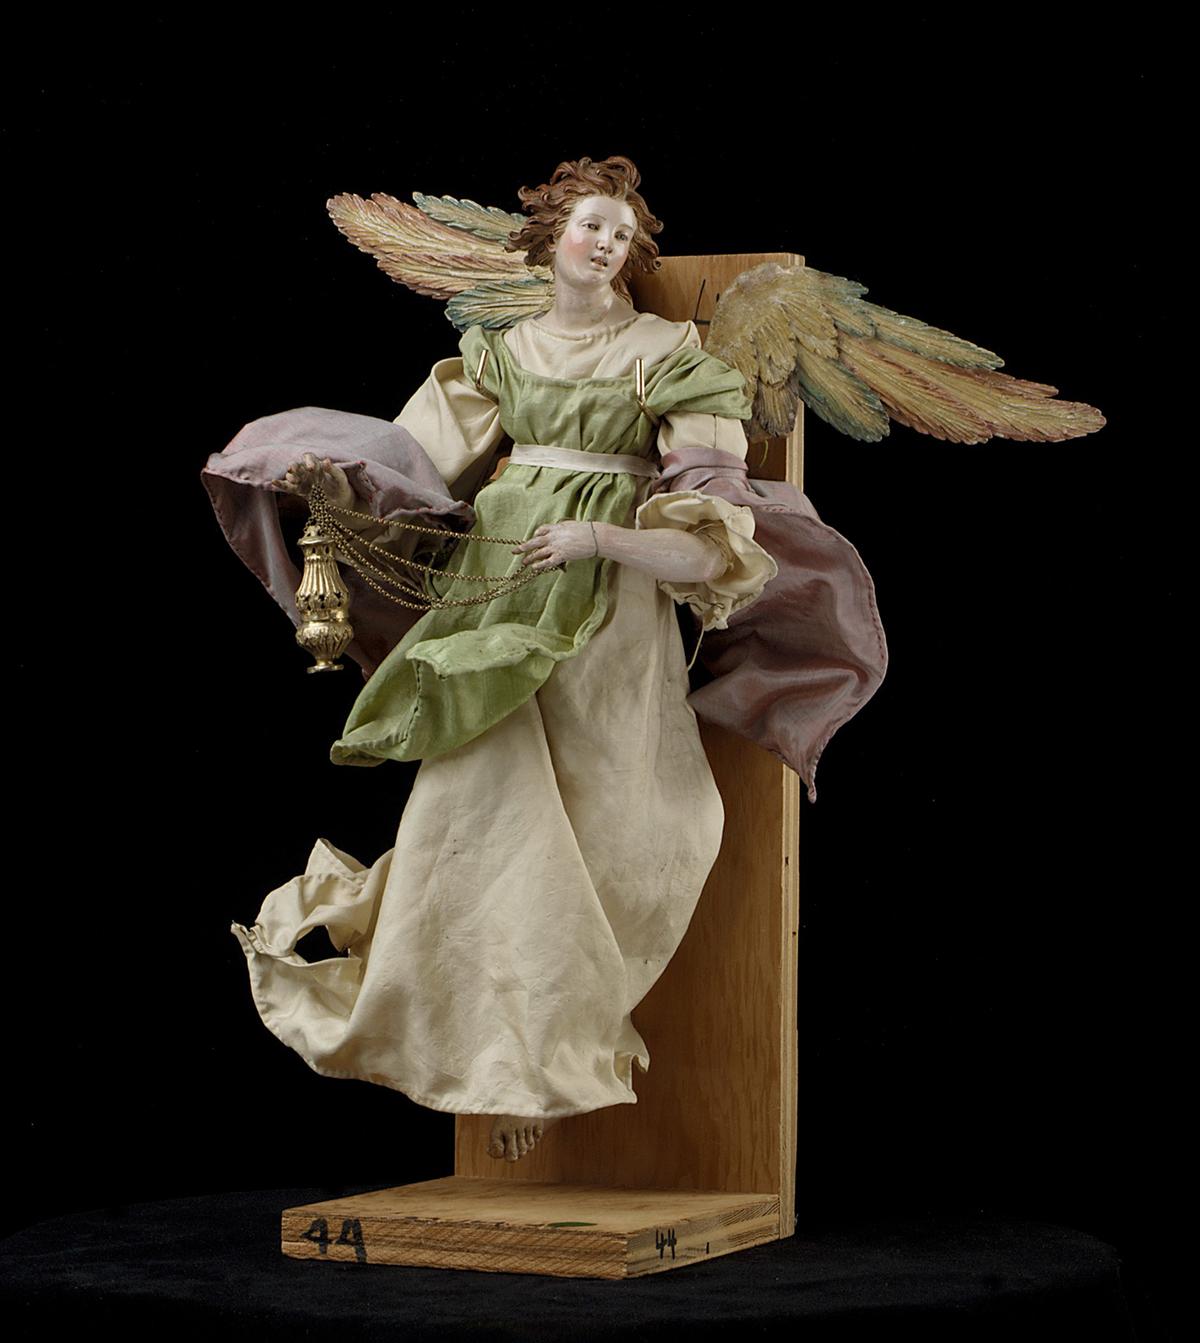 Angel, 18th century, attributed to Giuseppe Sanmartino. Polychromed terracotta head; wooden limbs and wings; body of wire wrapped in tow; various fabrics. Gift of Loretta Hines Howard, The Metropolitan Museum of Art, New York City. (Public Domain)